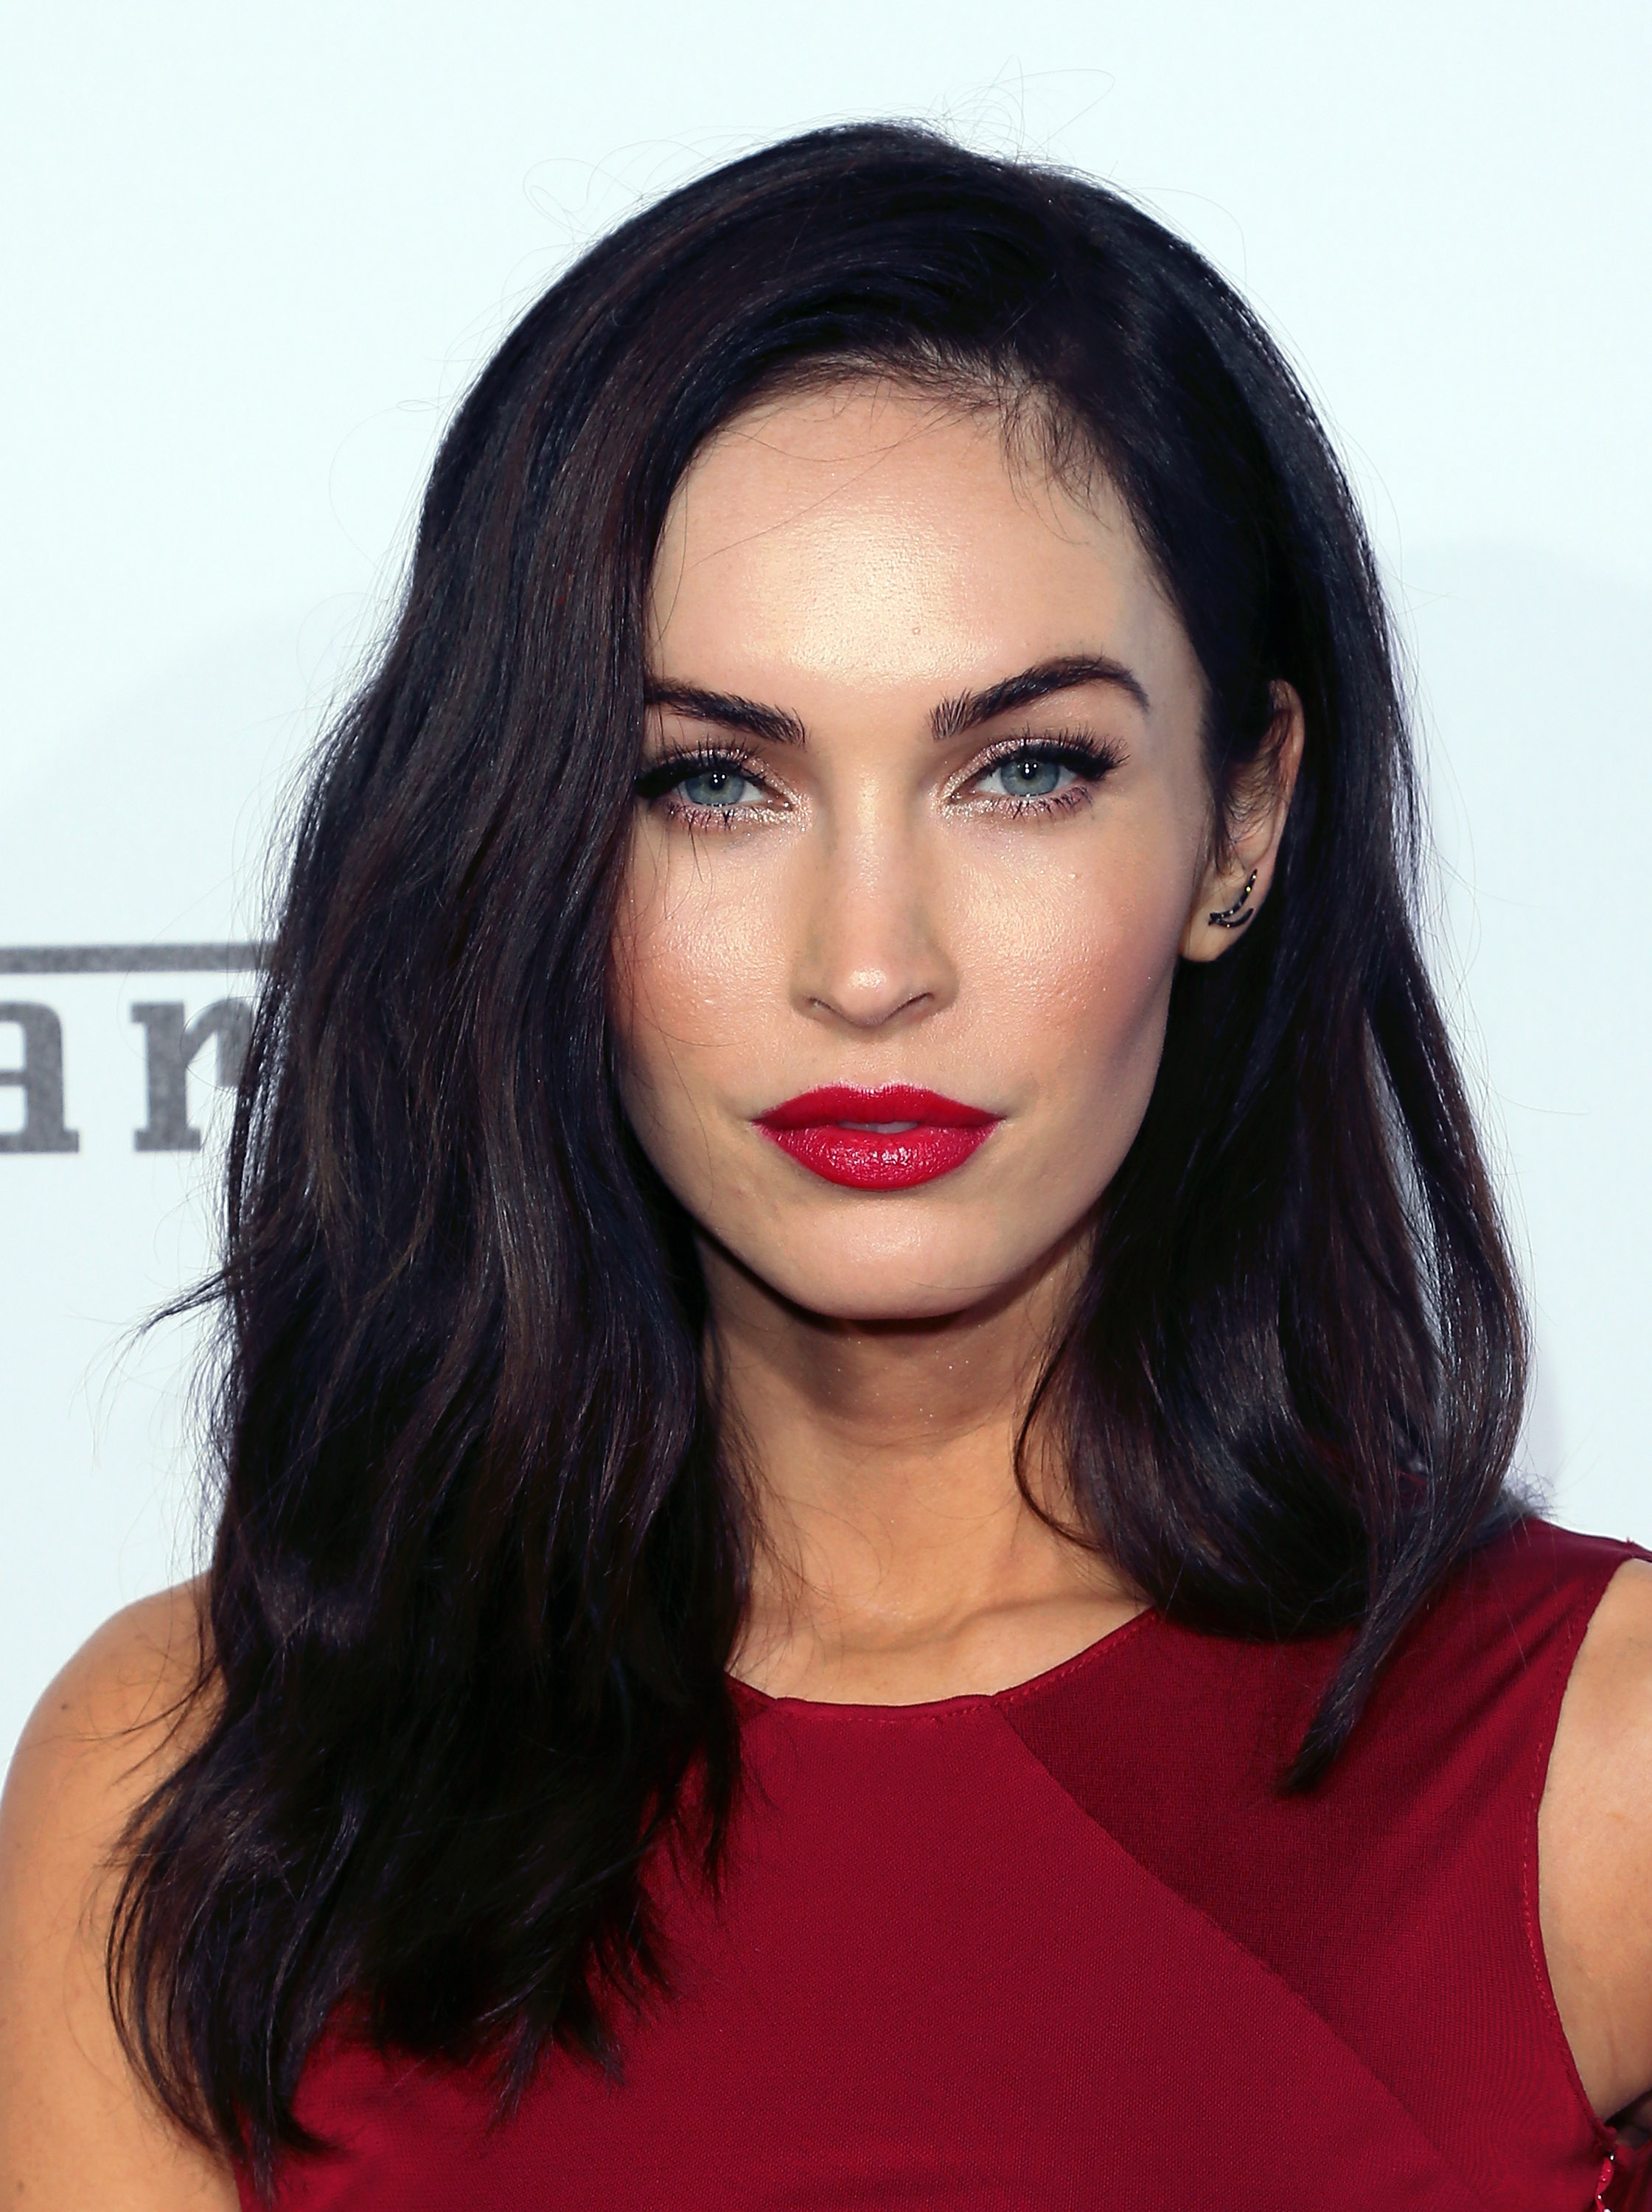 Megan Fox on October 11, 2014, in Beverly Hills, California. | Source: Getty Images